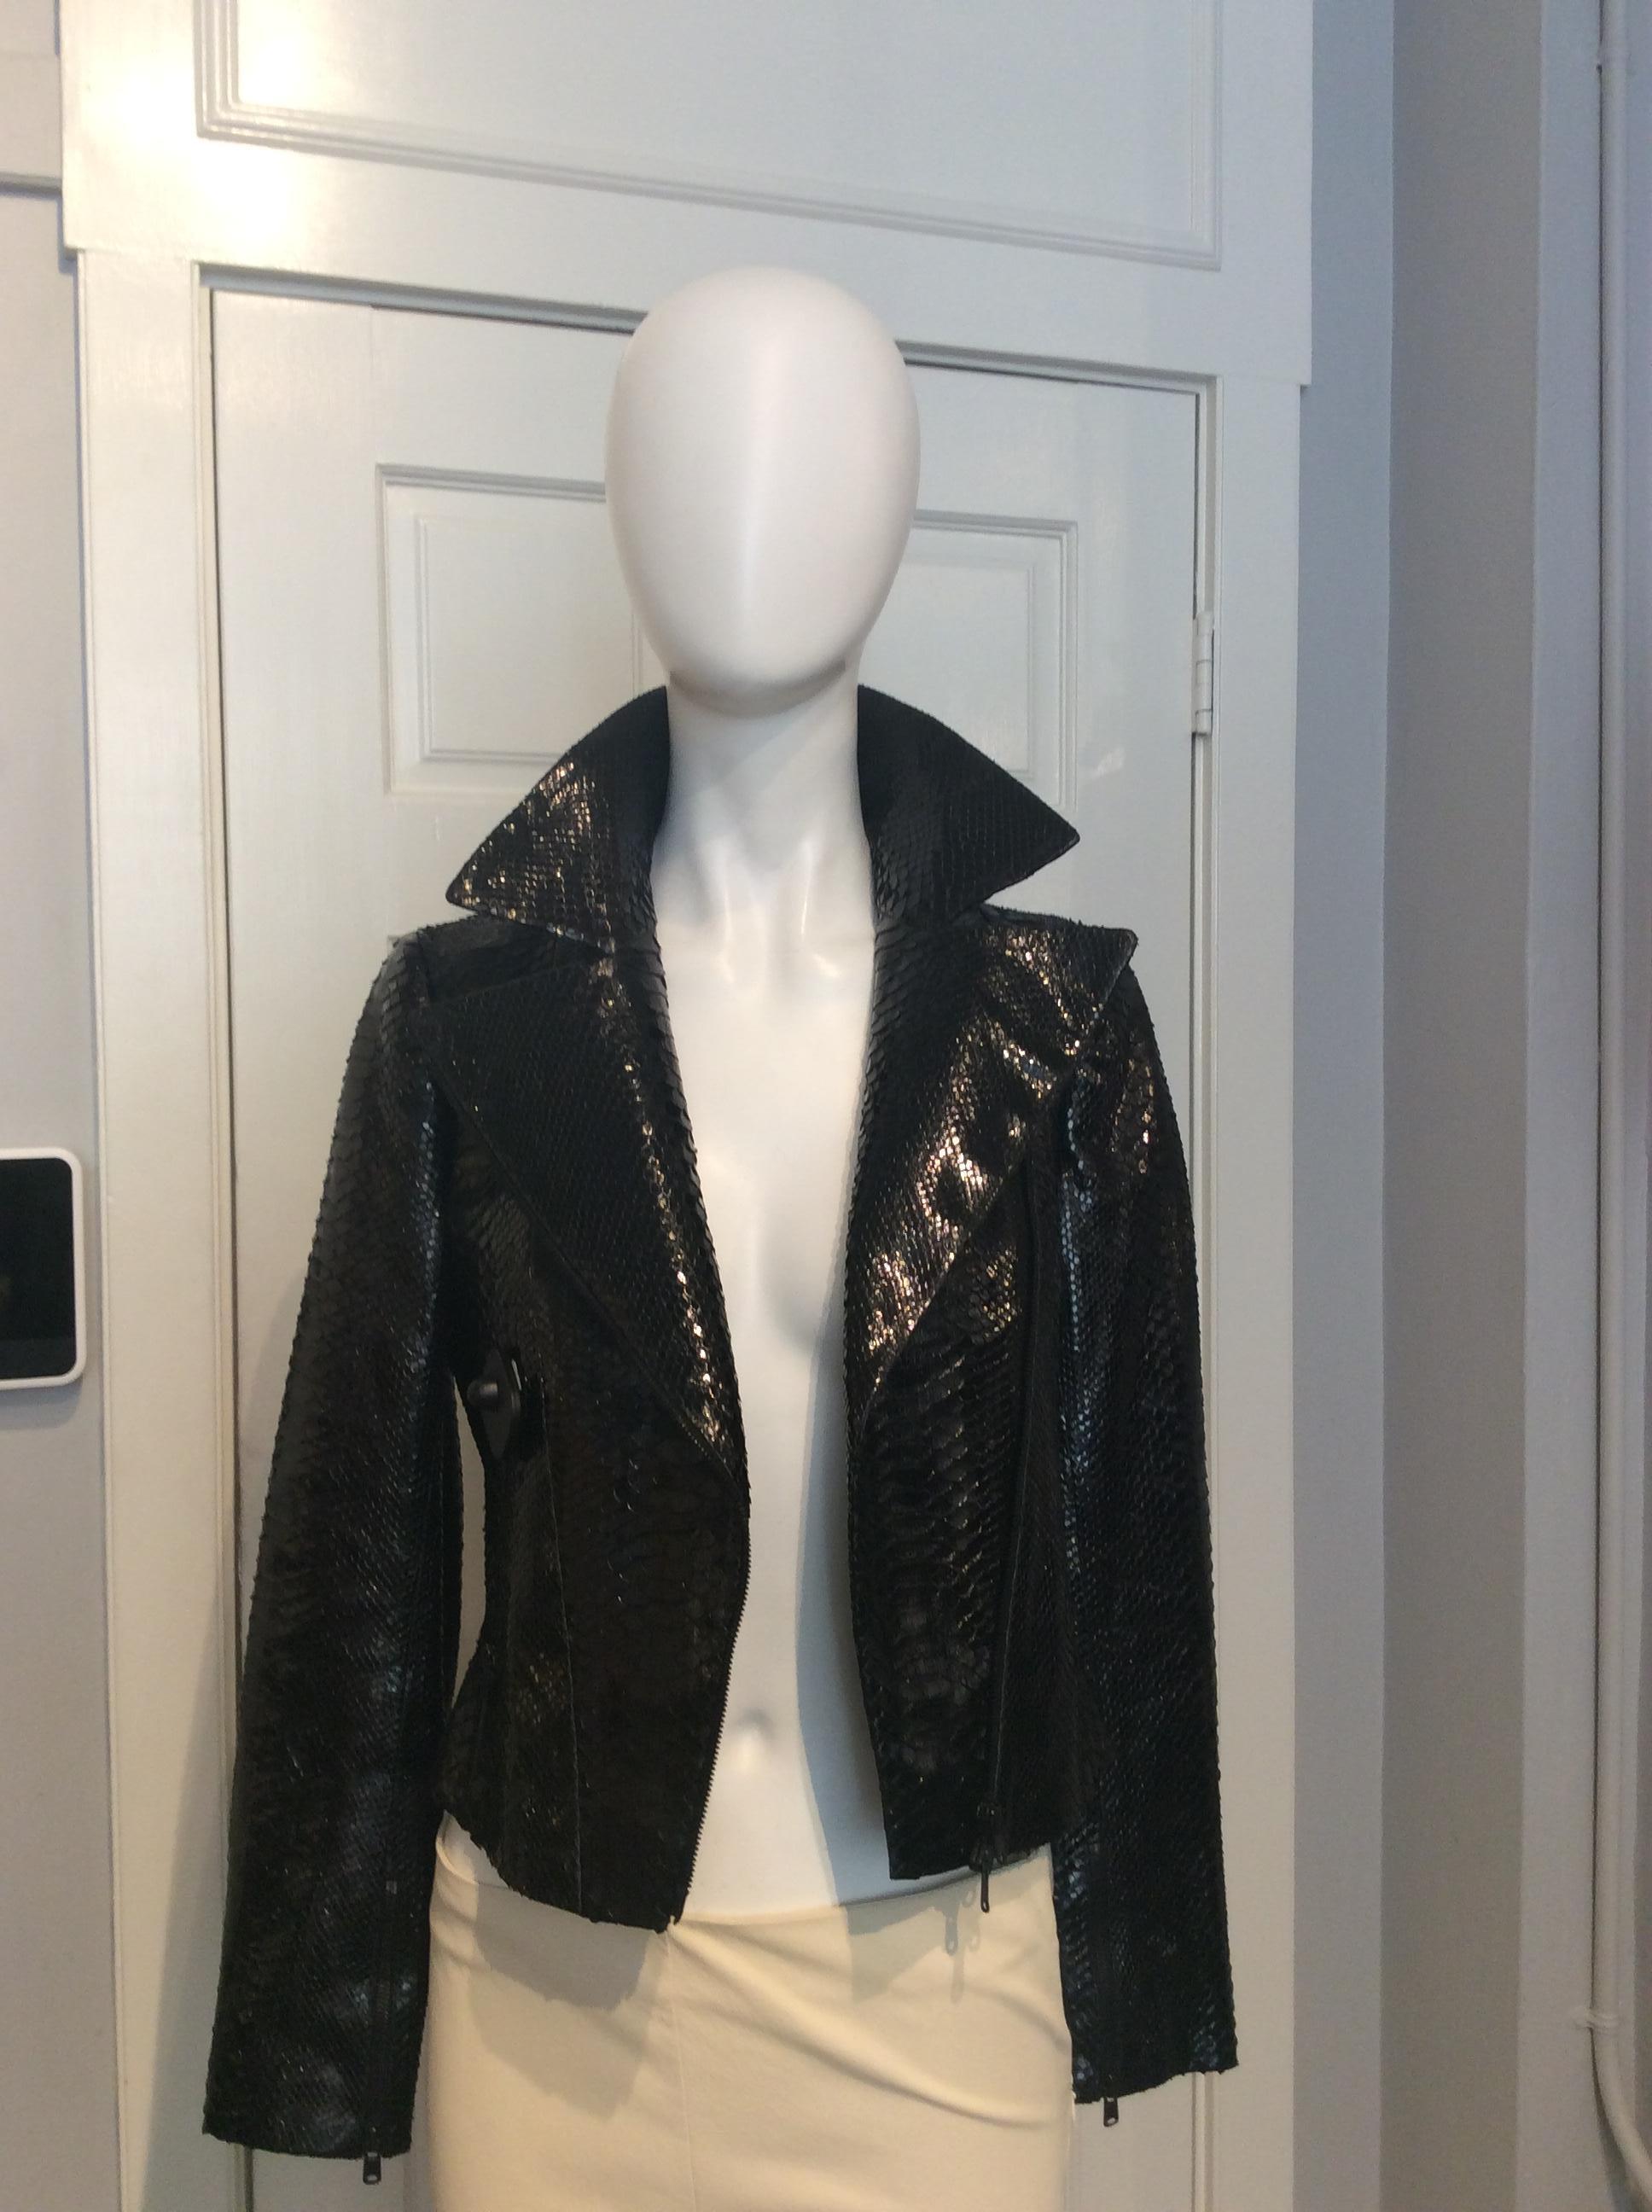 Alaia Black Snakeskin Cropped Moto Jacket, Size 38
Black Python Cropped Jacket with Triangular Cutout Details
Asymmetrical Zipper Closure
Zipper front pockets and Zippered sleeves
